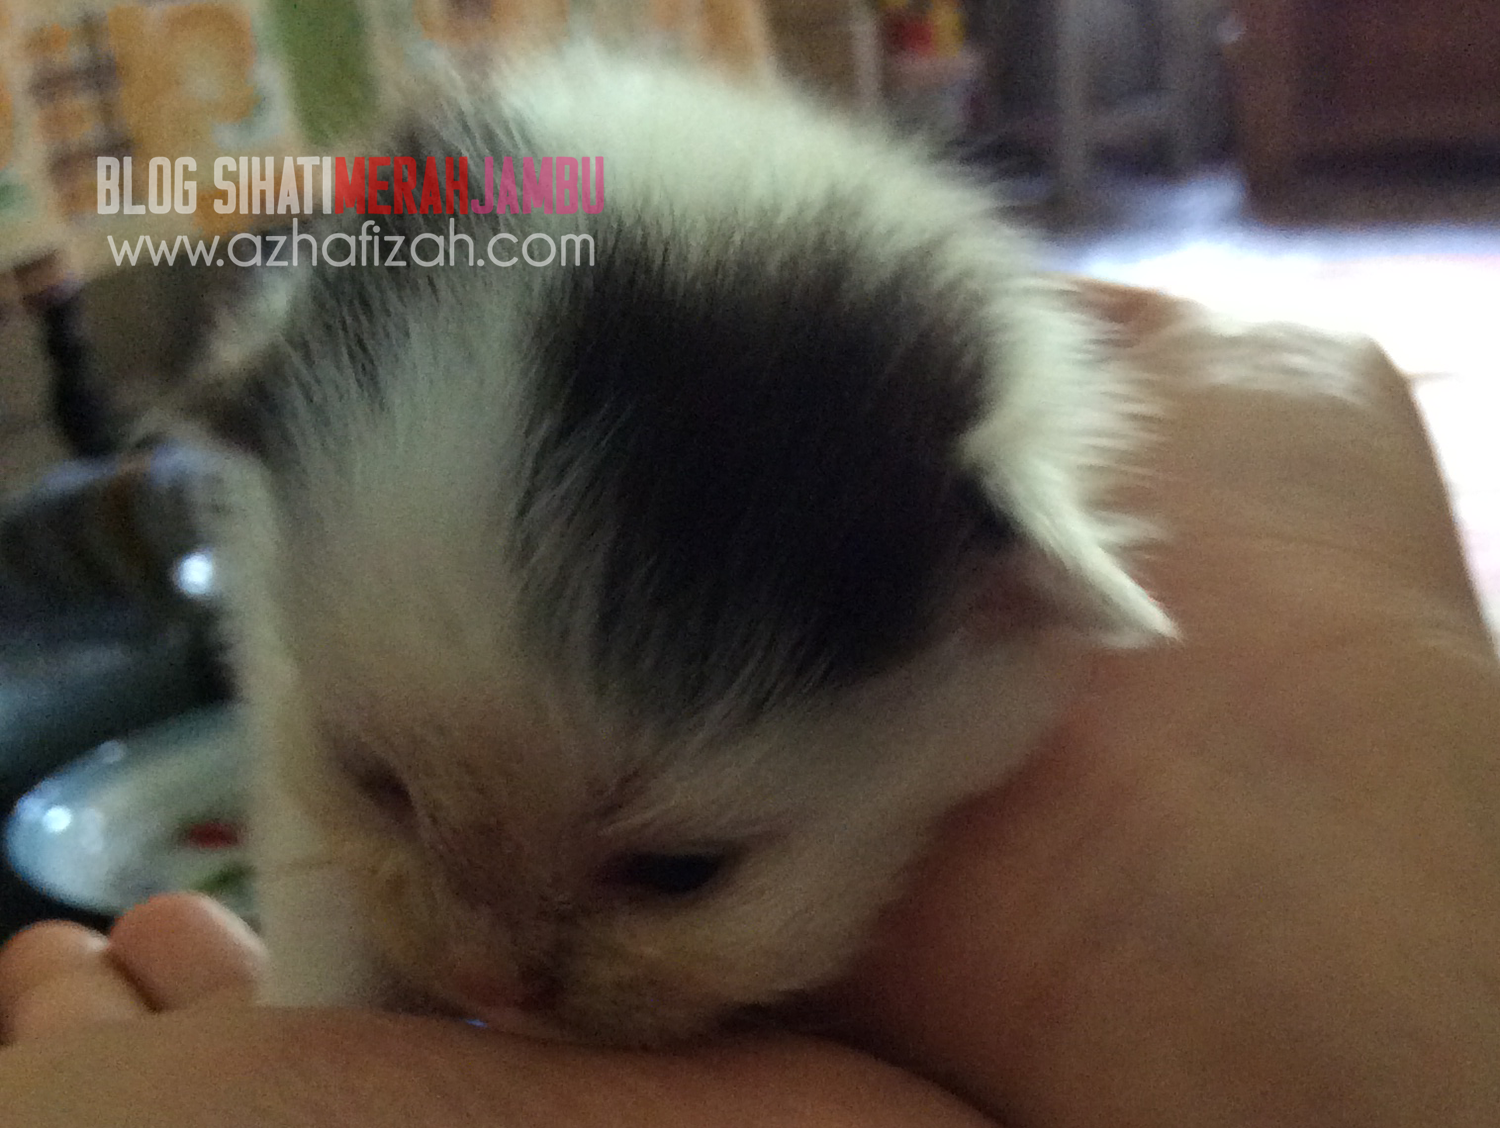 Black and White mix breed kittens